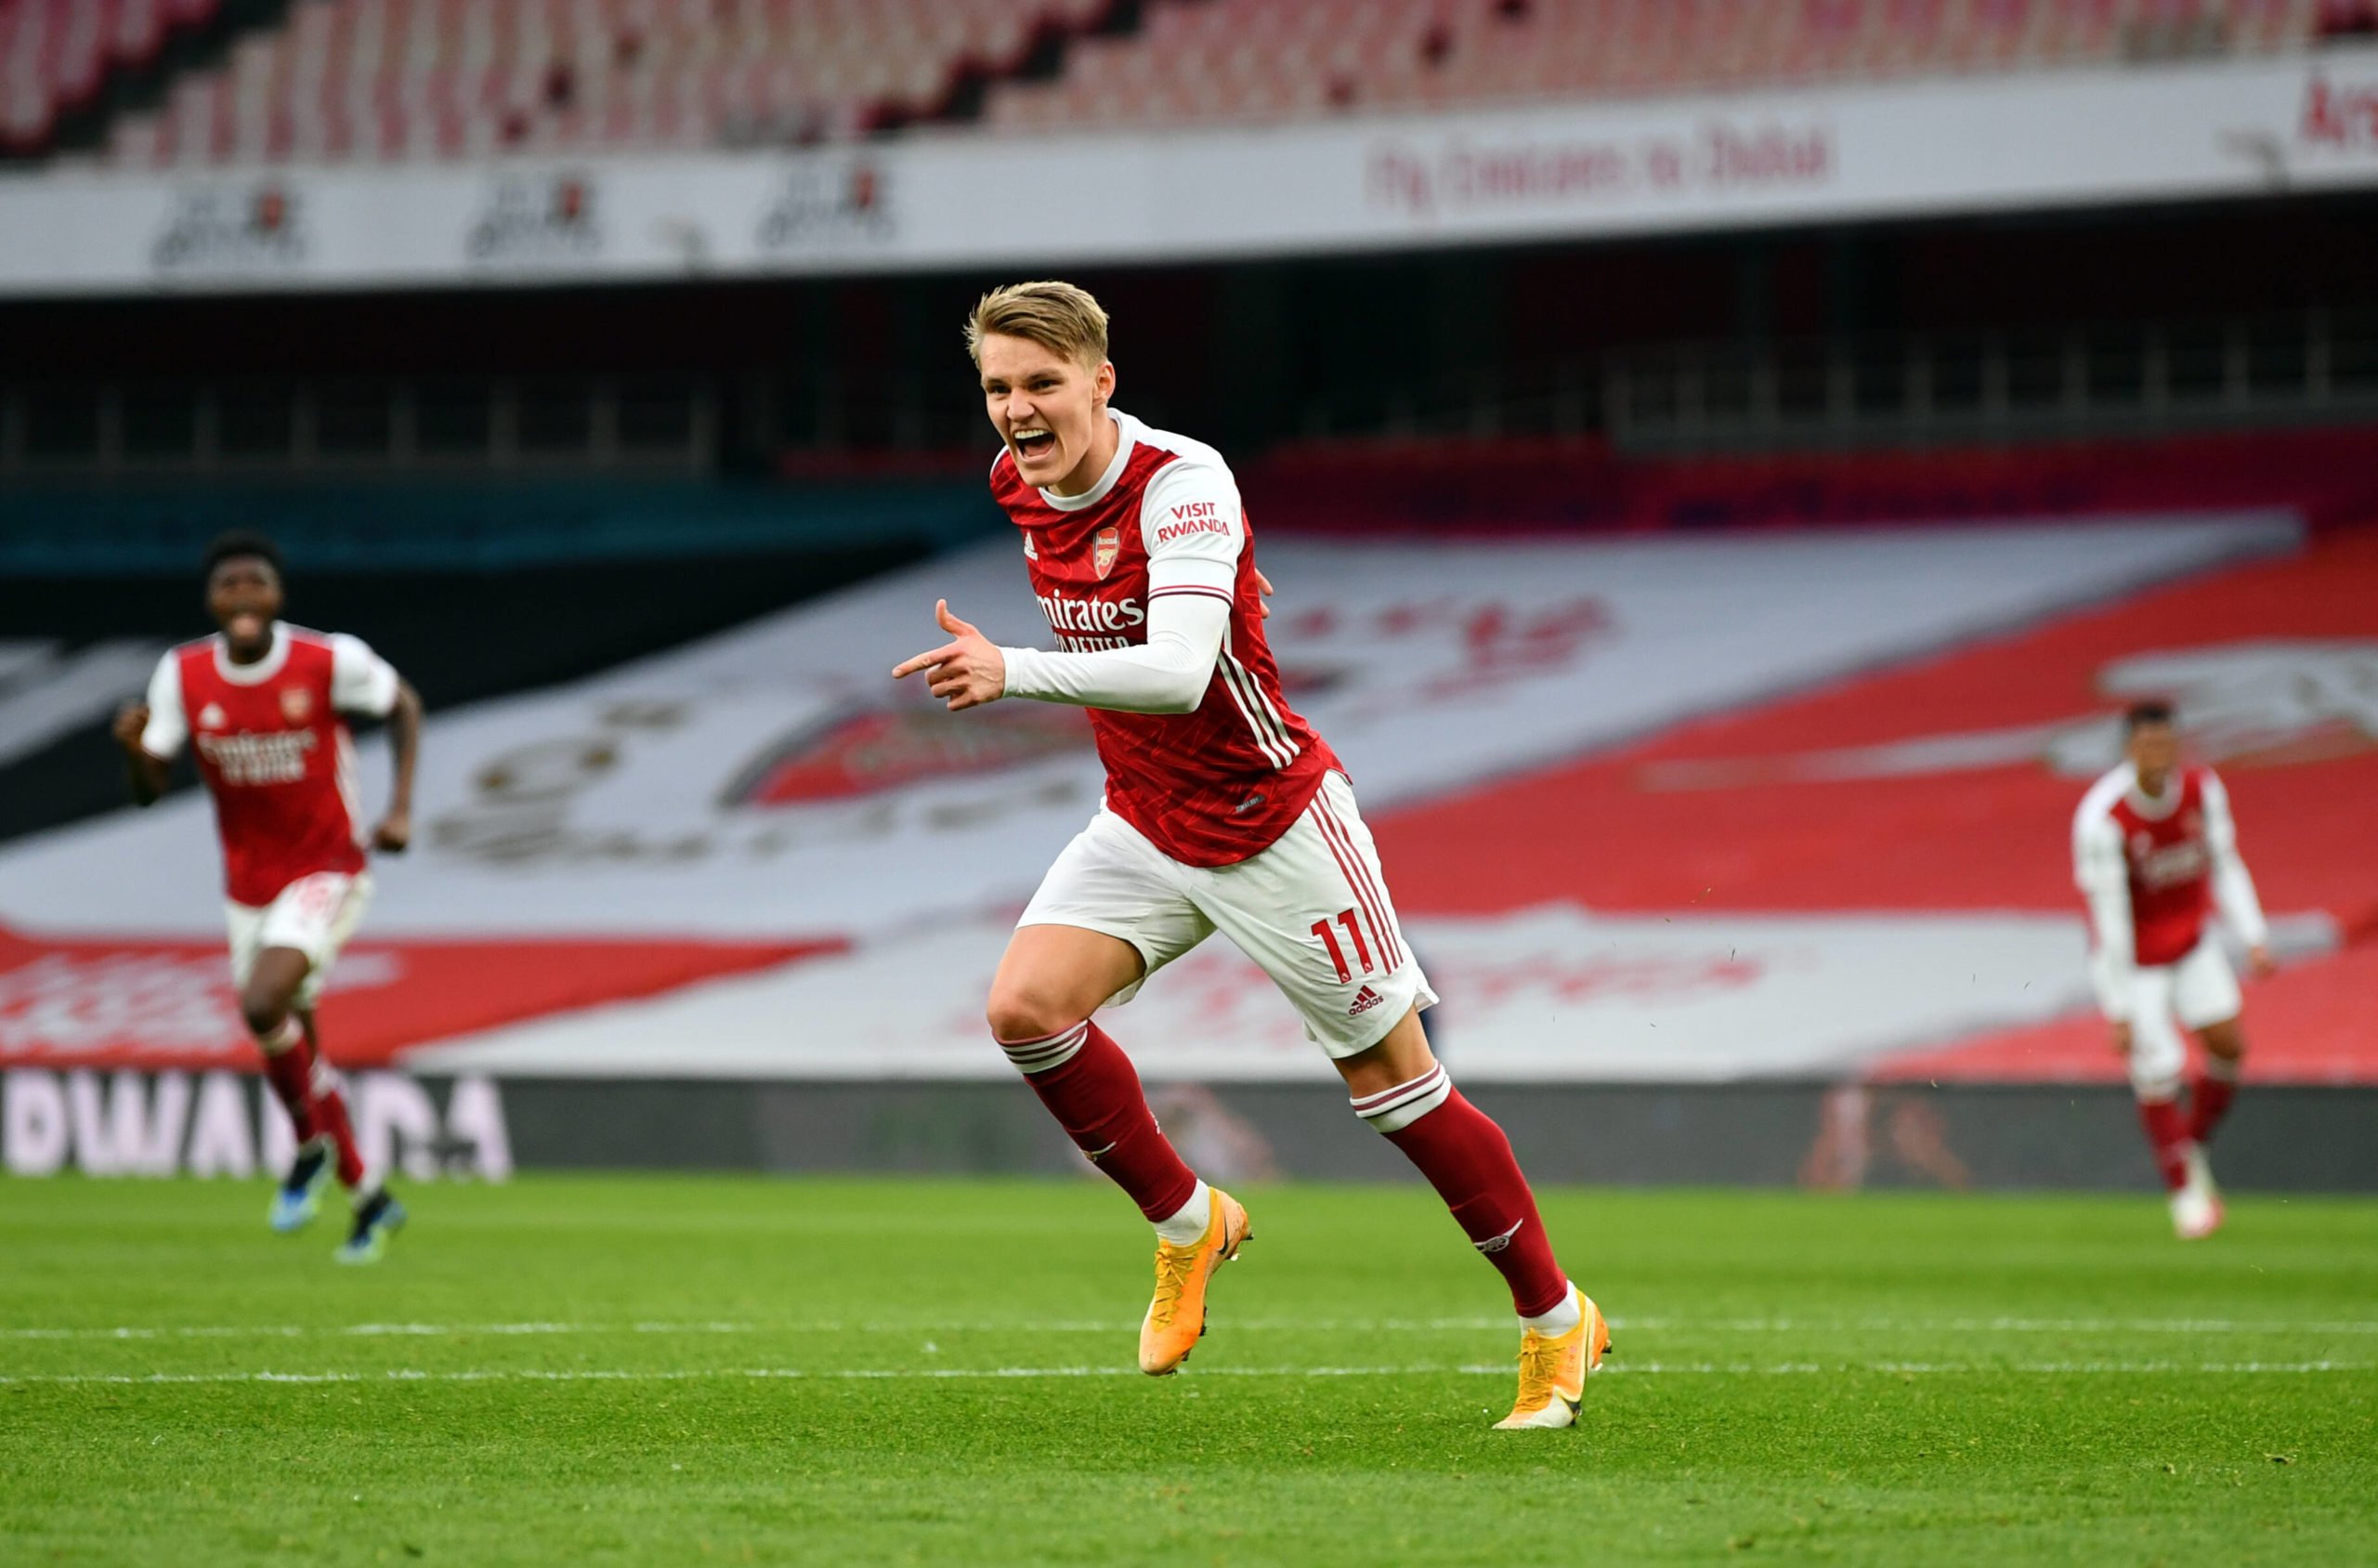 Arsenal Players Rated In Win Vs Tottenham Hotspur (Martin Odegaard can be seen in the picture)